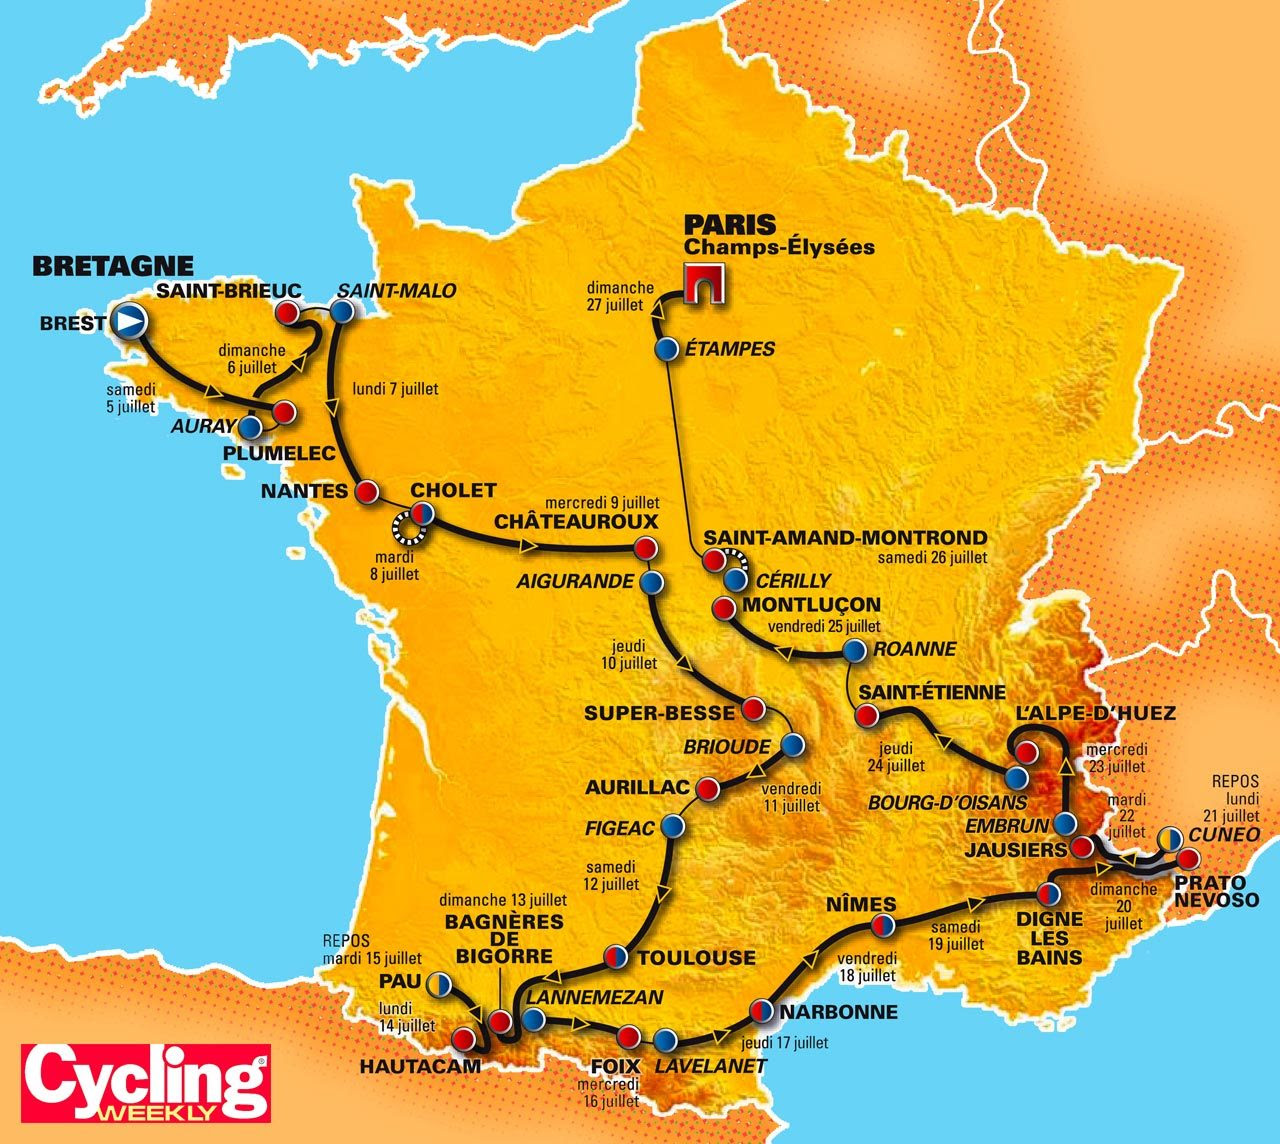 where did the tour de france start in 2003